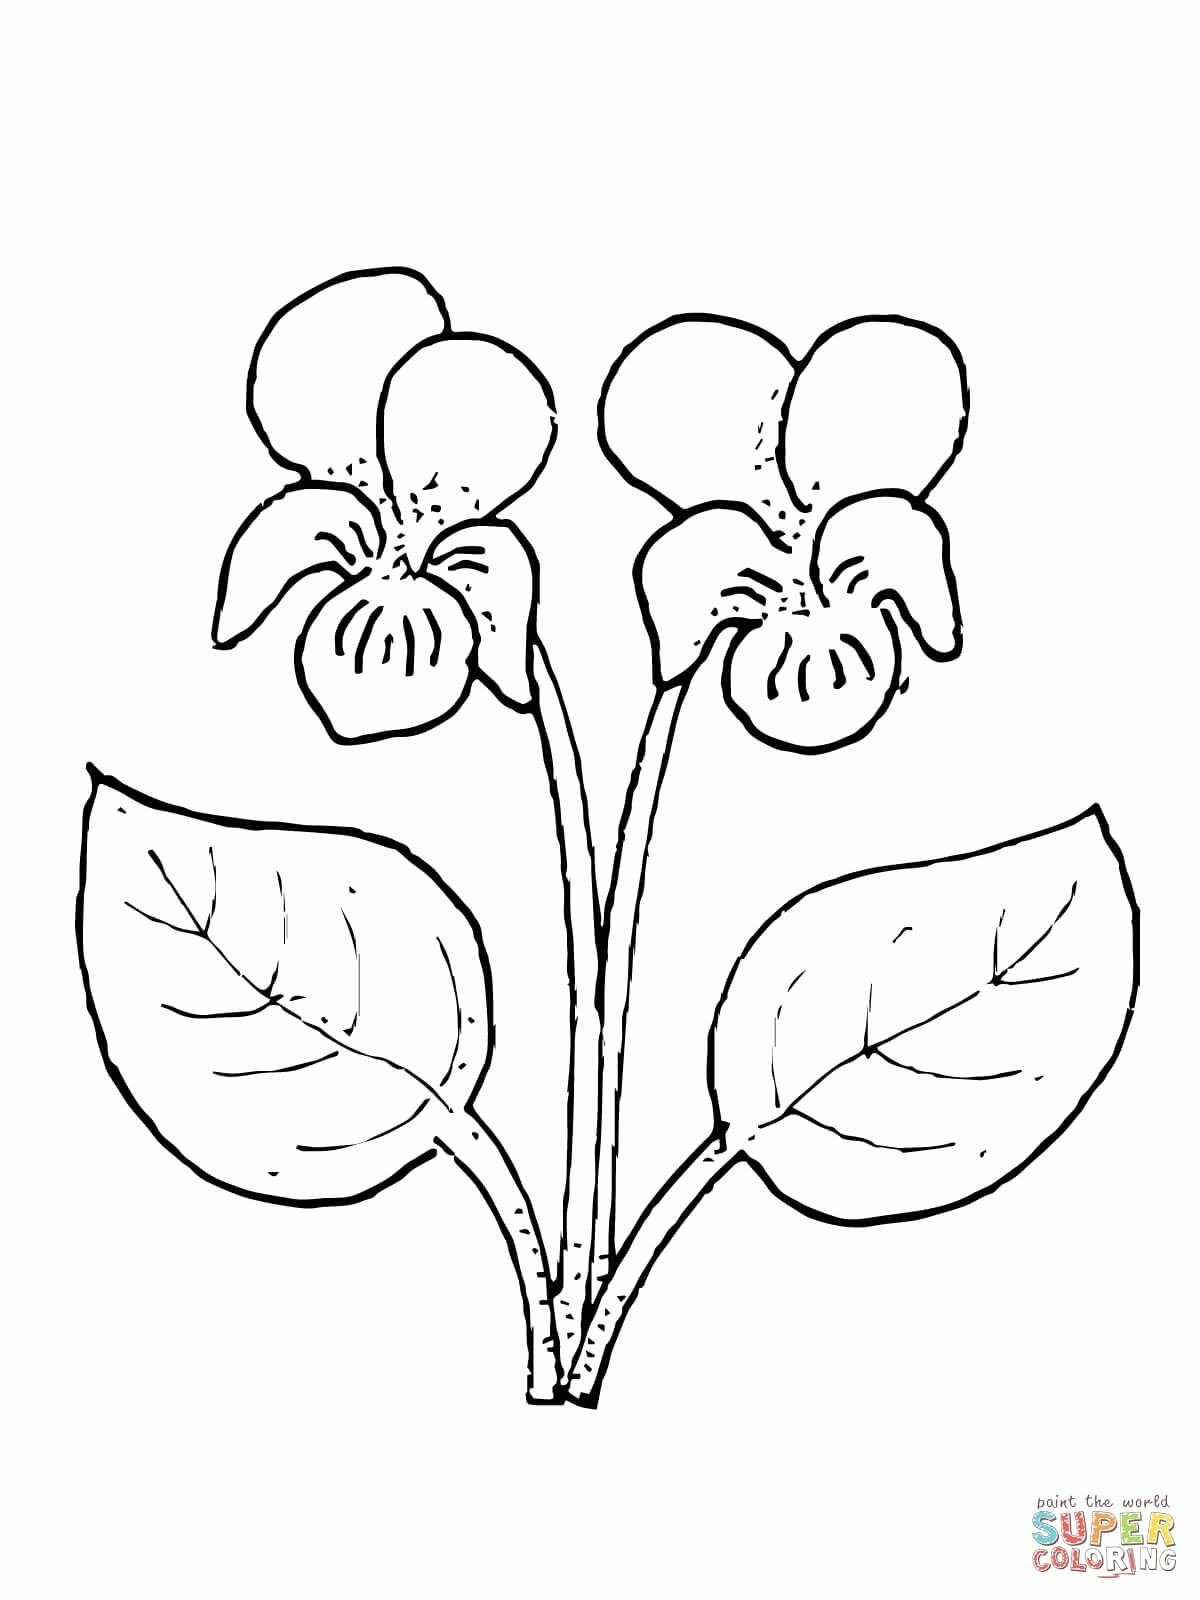 satsuma vase ebay of cheap vases for sale beautiful coloring pages awesome cool vases inside cheap vases for sale beautiful coloring pages awesome cool vases flower vase coloring fun time